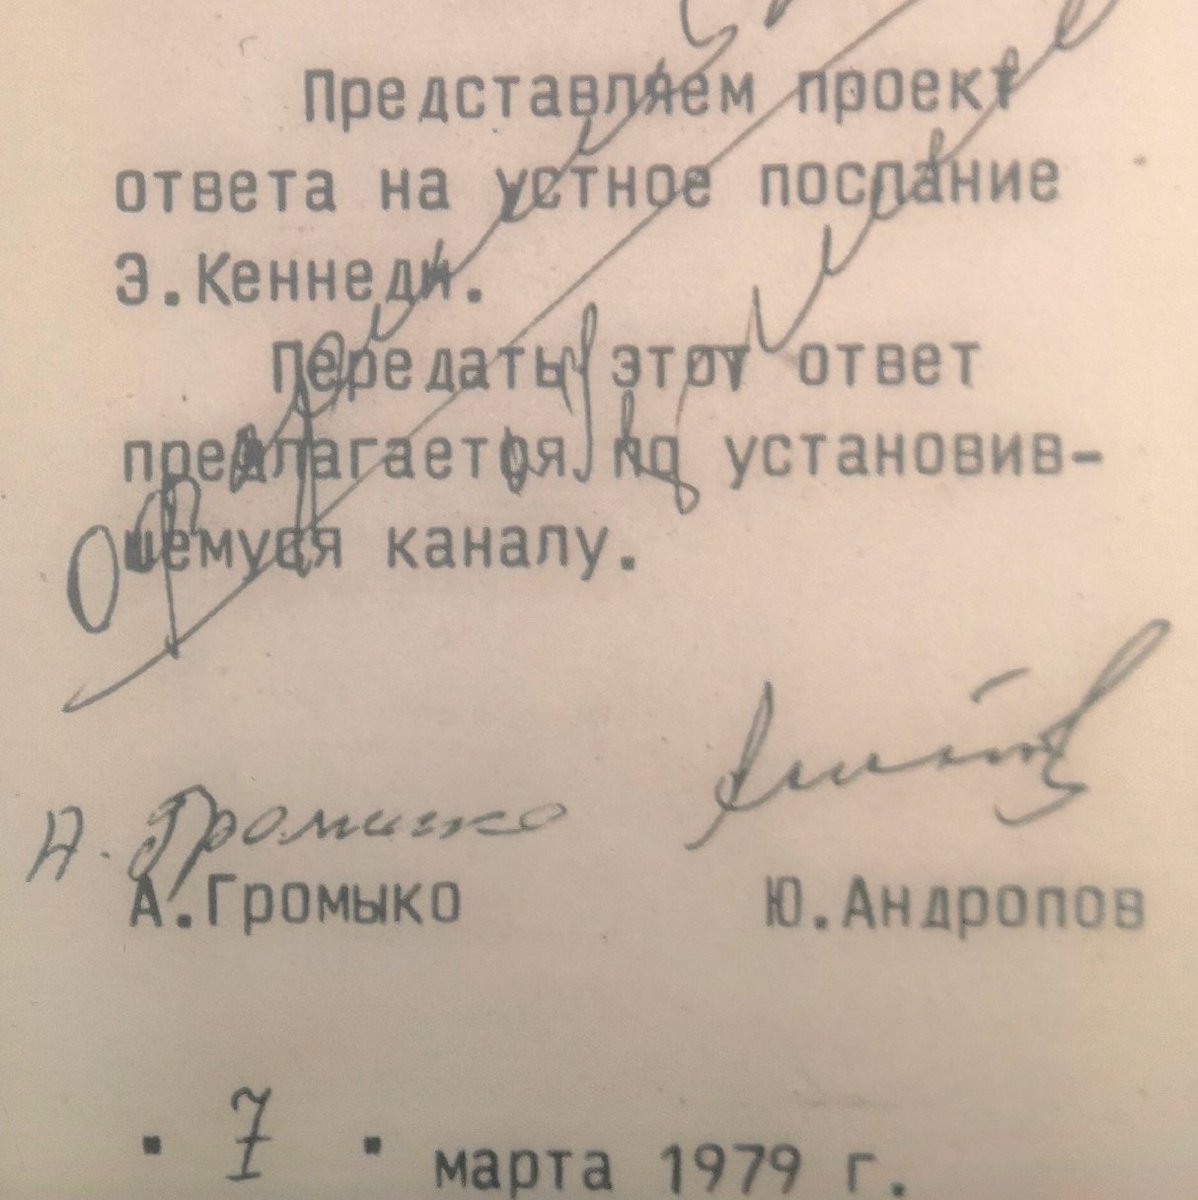 But I always wondered how he exchanged messages with the Soviet leaders. Turns out there was a backchannel. We see a reference to it in this memo from Gromyko and Andropov to Brezhnev, which refers to Ted Kennedy's "oral message" through the "established channel."